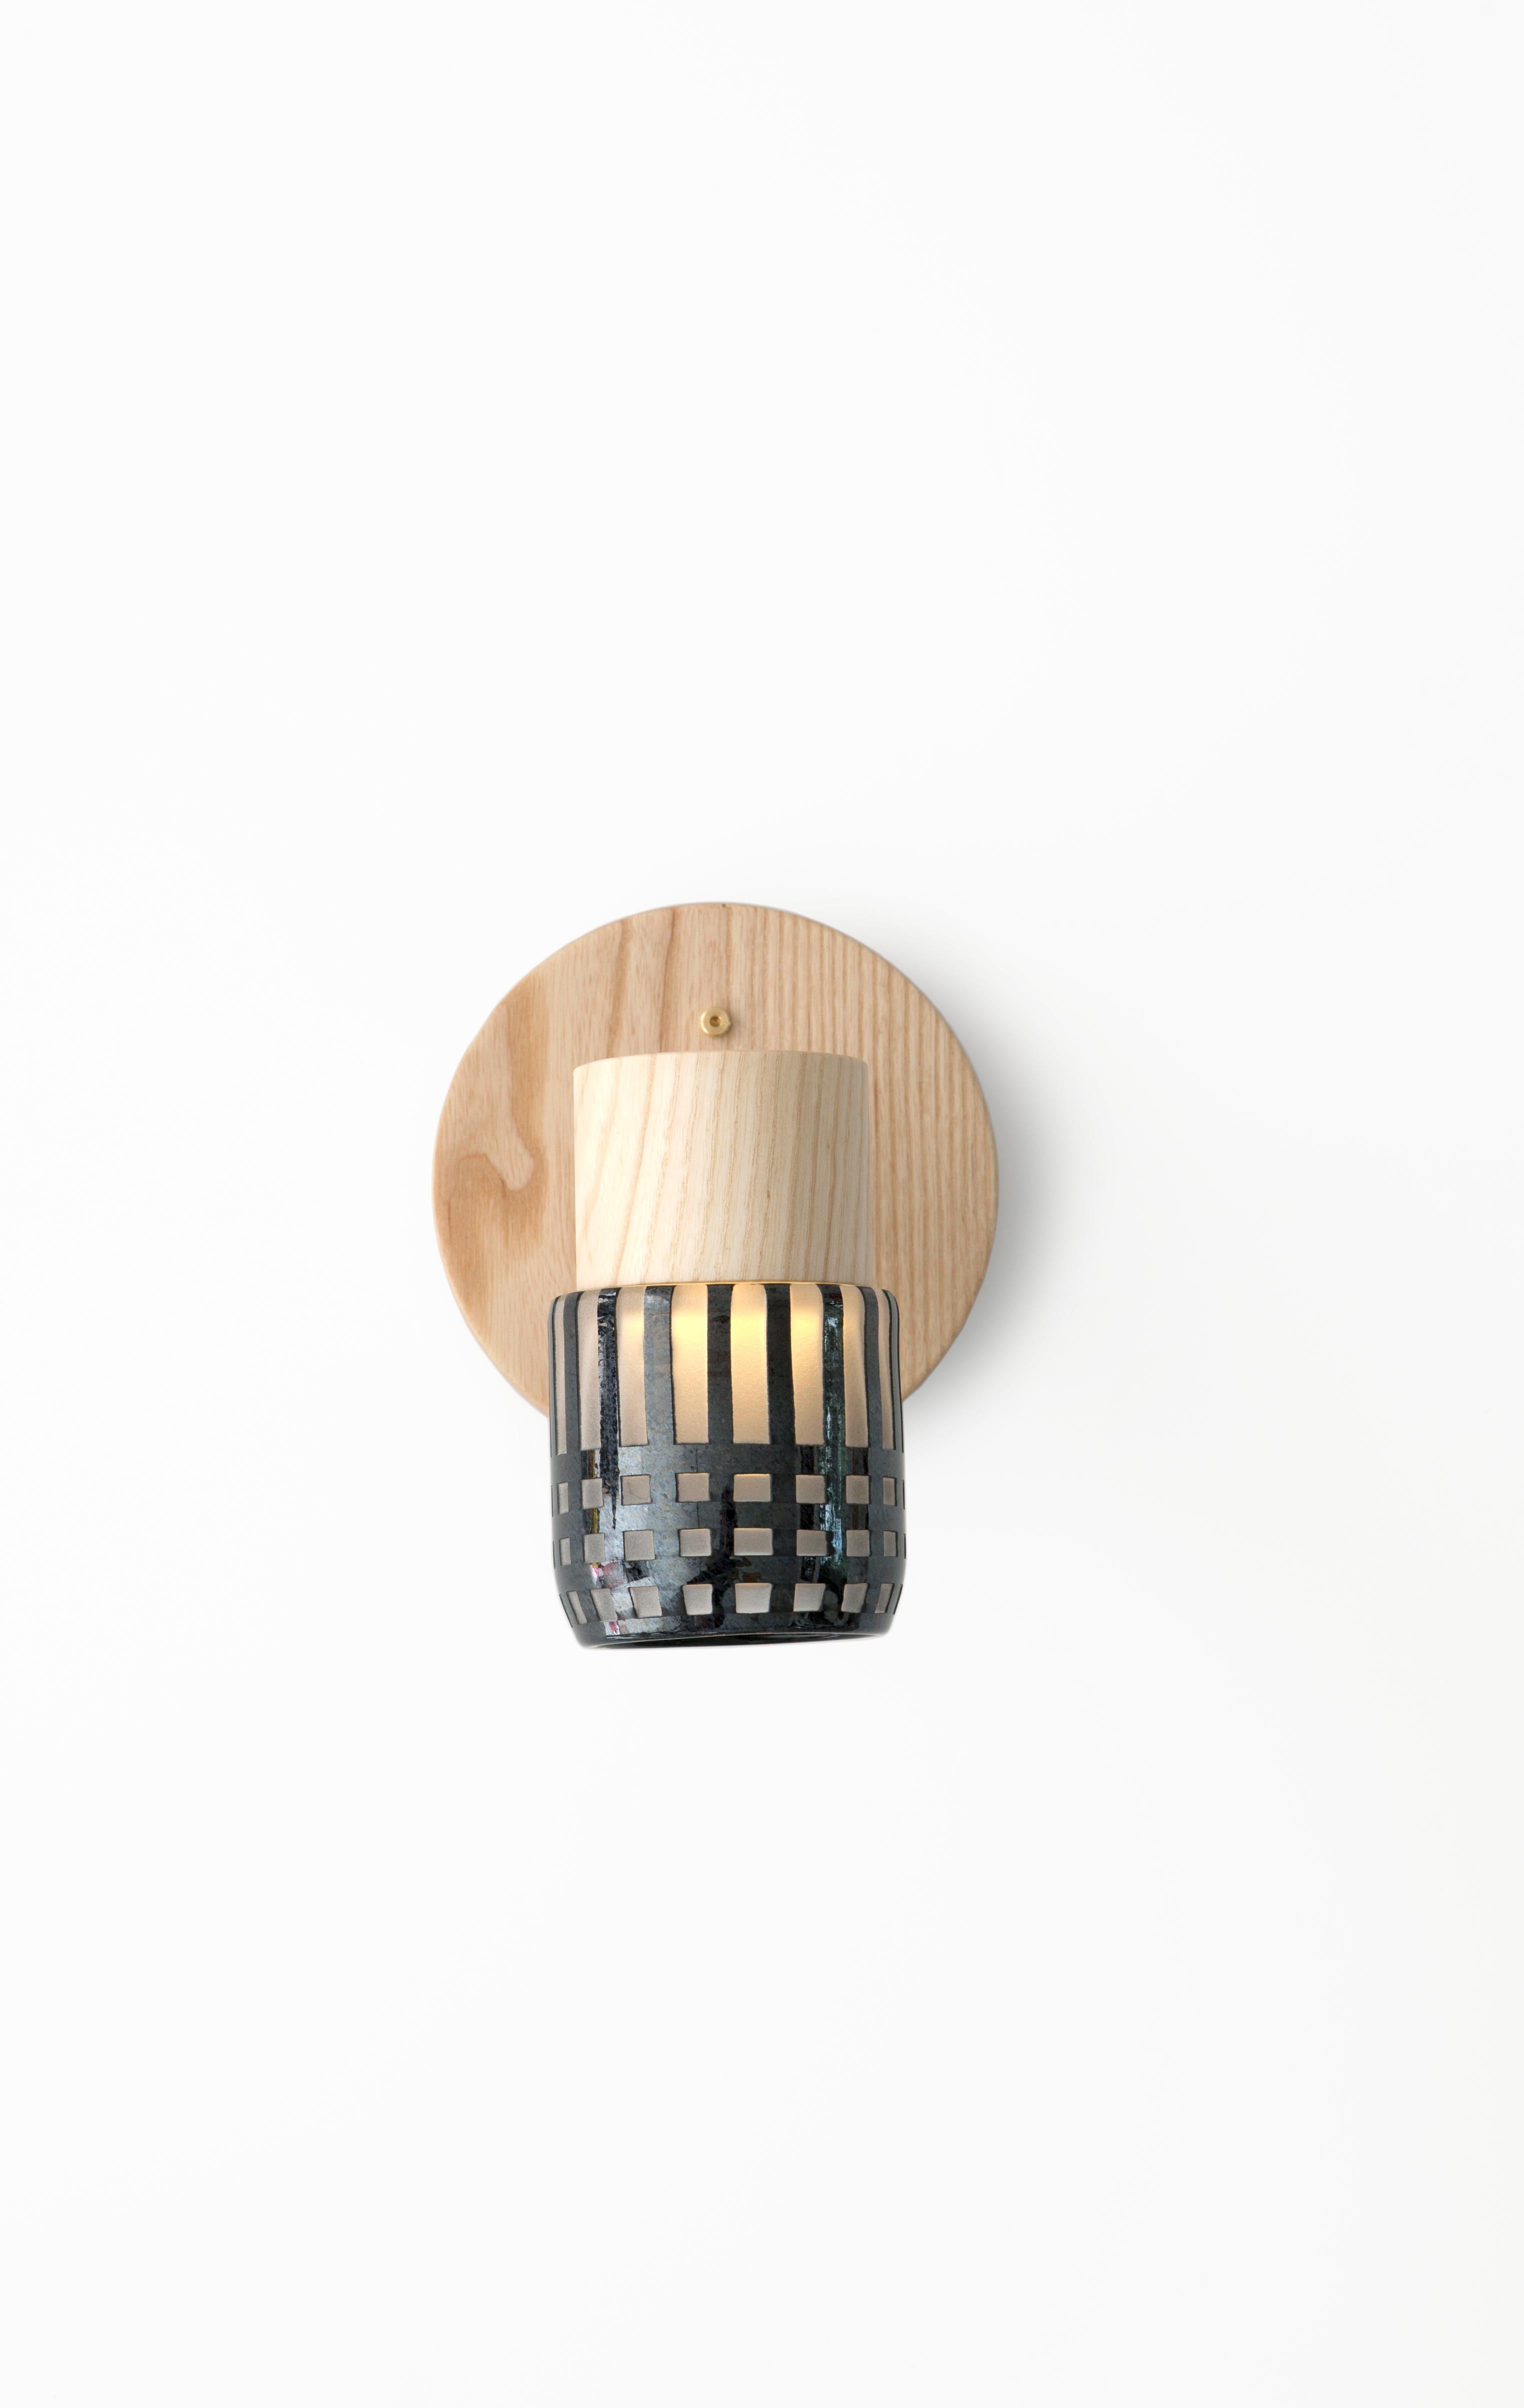 This handmade sconce pairs a minimal solid wood canopy with a hand blown glass diffuser. Efficient LED lighting components are neatly hidden in each canopy allowing the glass diffuser to illuminate without a visible bulb. 

Built in the Pacific